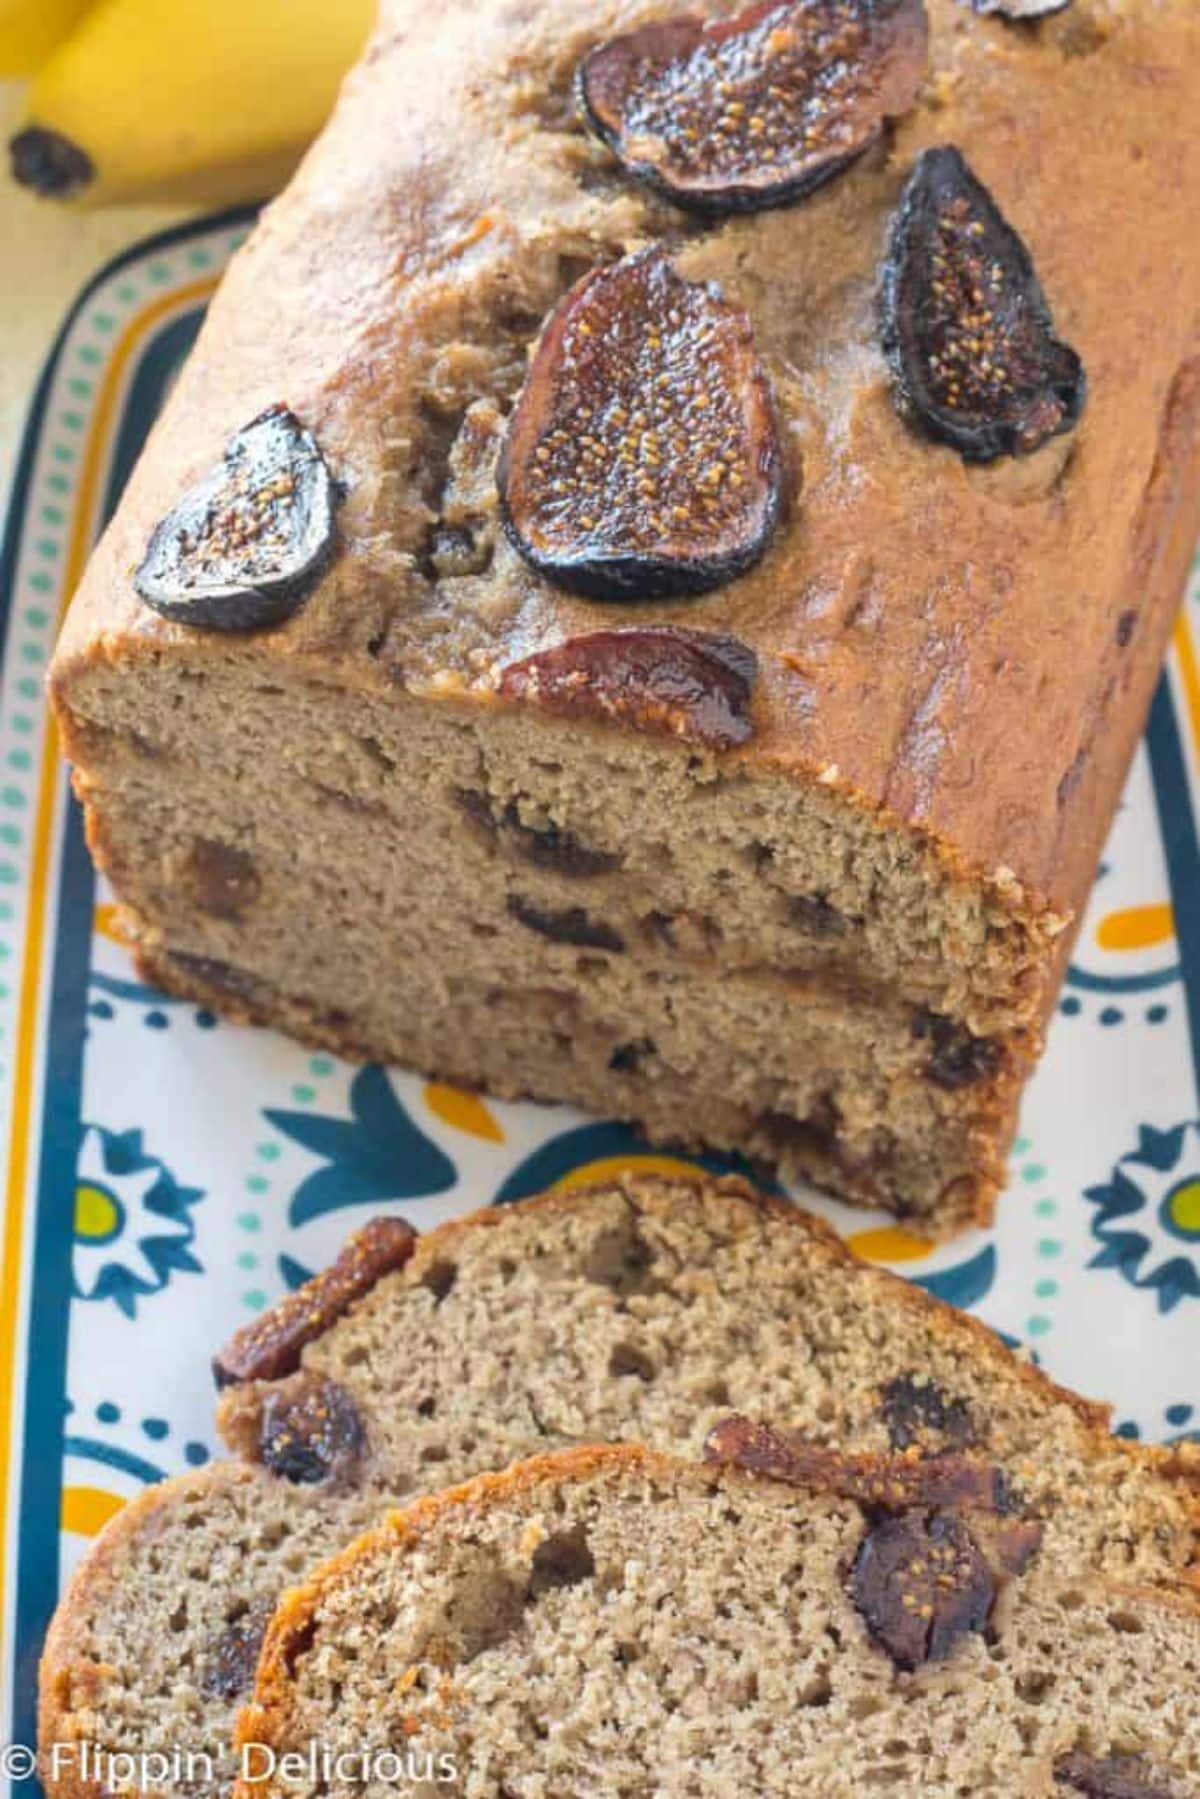 Partially sliced Banana Bread With Figs on a tray.